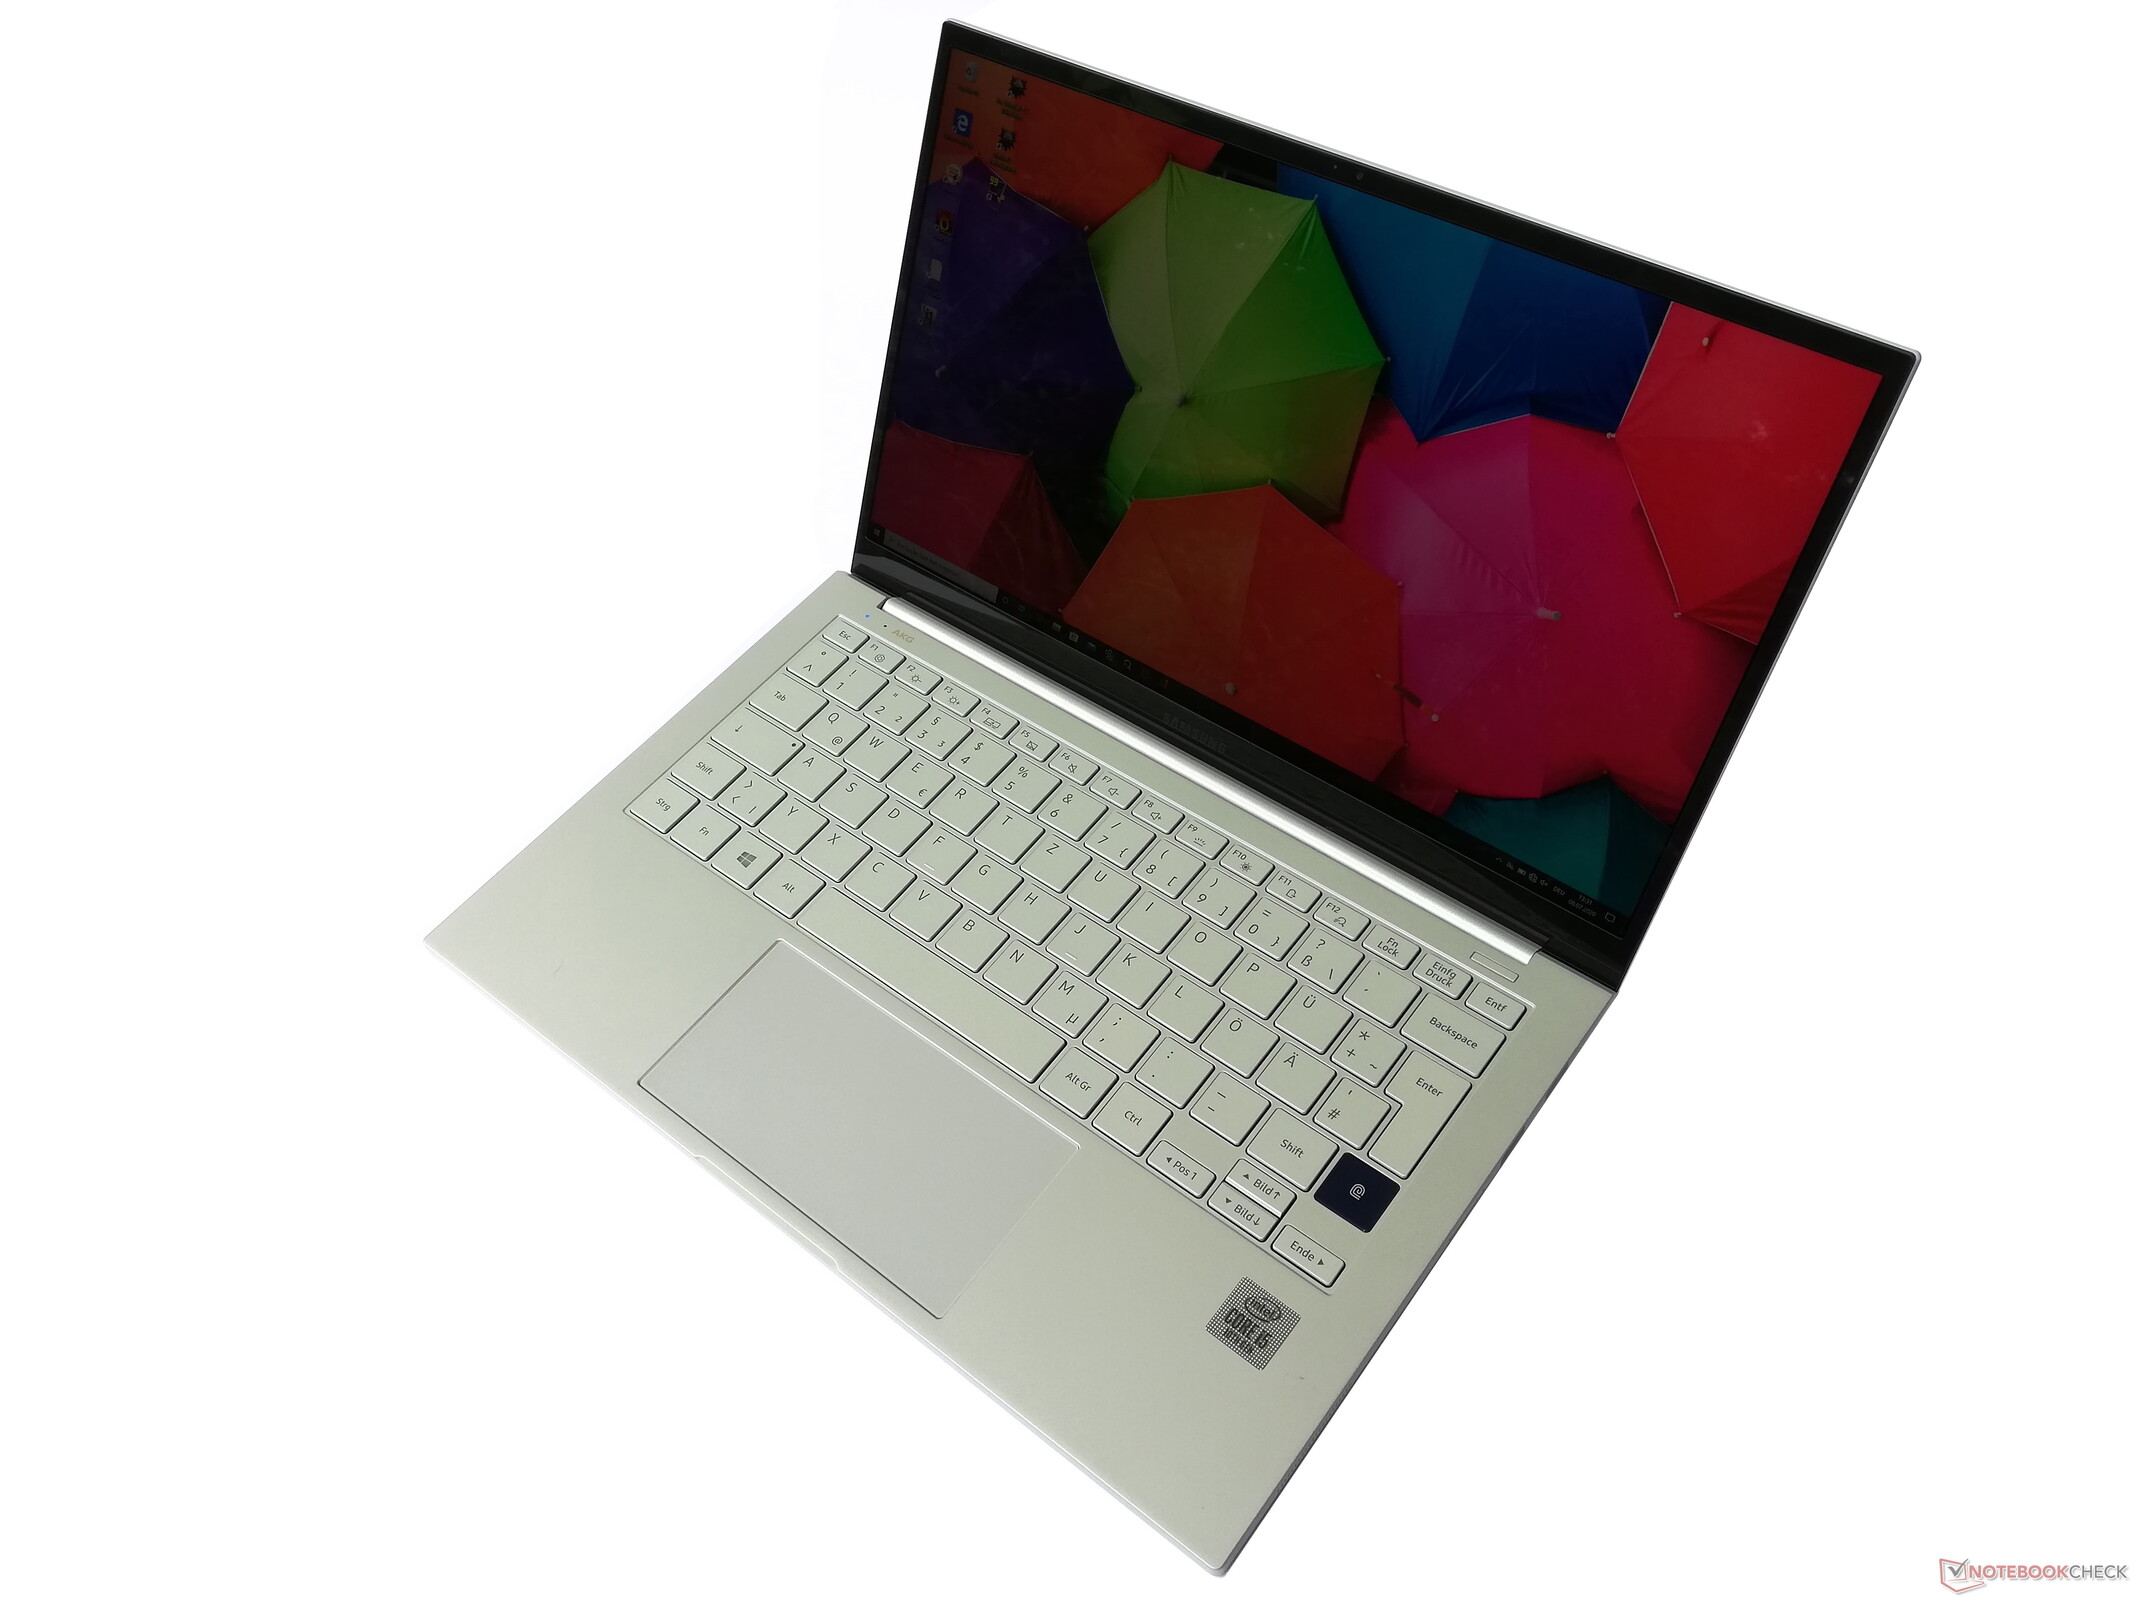 Looking for Dell XPS 13 alternative? The QLED Samsung Galaxy Book Ion with Core i7 CPU and 512 GB SSD is now down to just $799 USD - NotebookCheck.net News